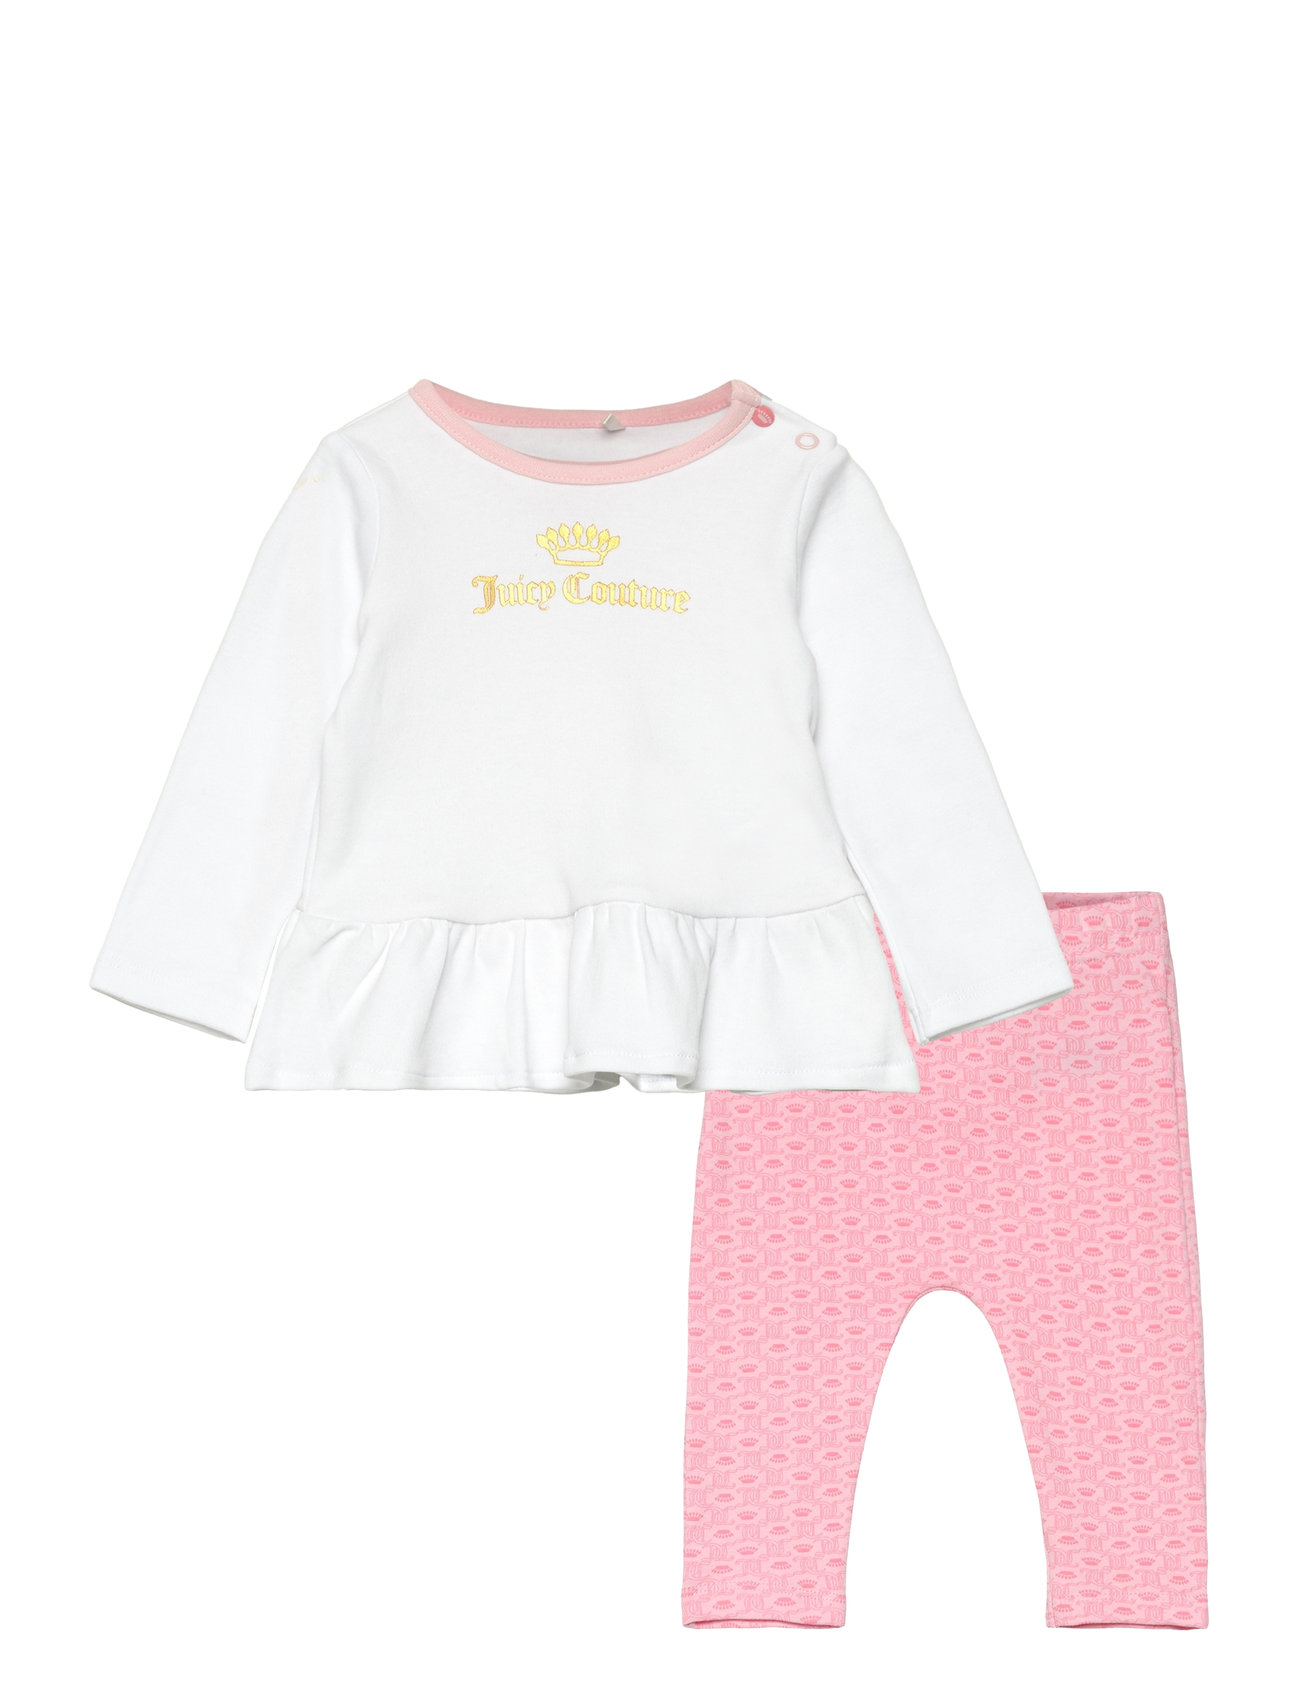 Ls Ruffle Tee & Legging & Bib Set Sets Sets With Long-sleeved T-shirt Multi/patterned Juicy Couture